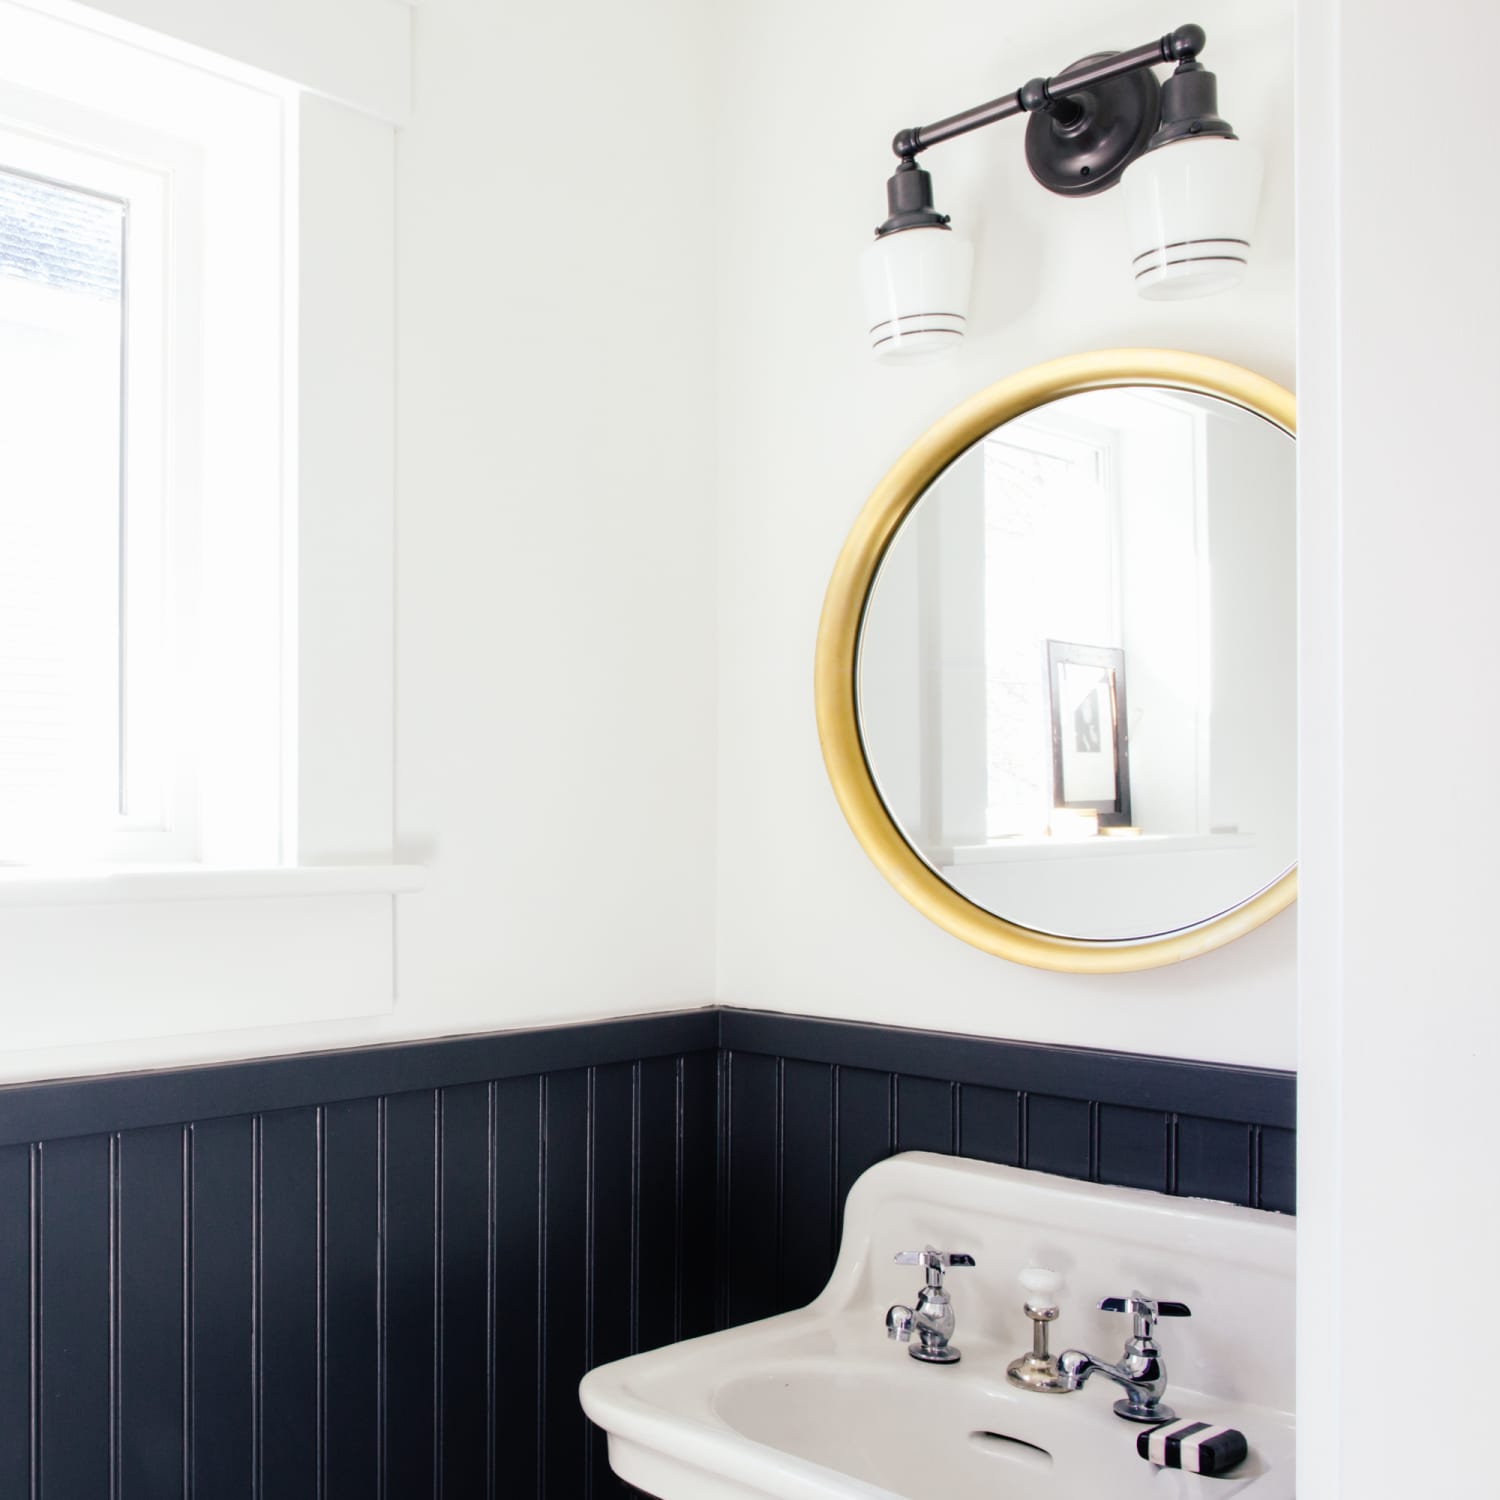 5 Tips for a Beautiful Bathroom Using Wall Panelling